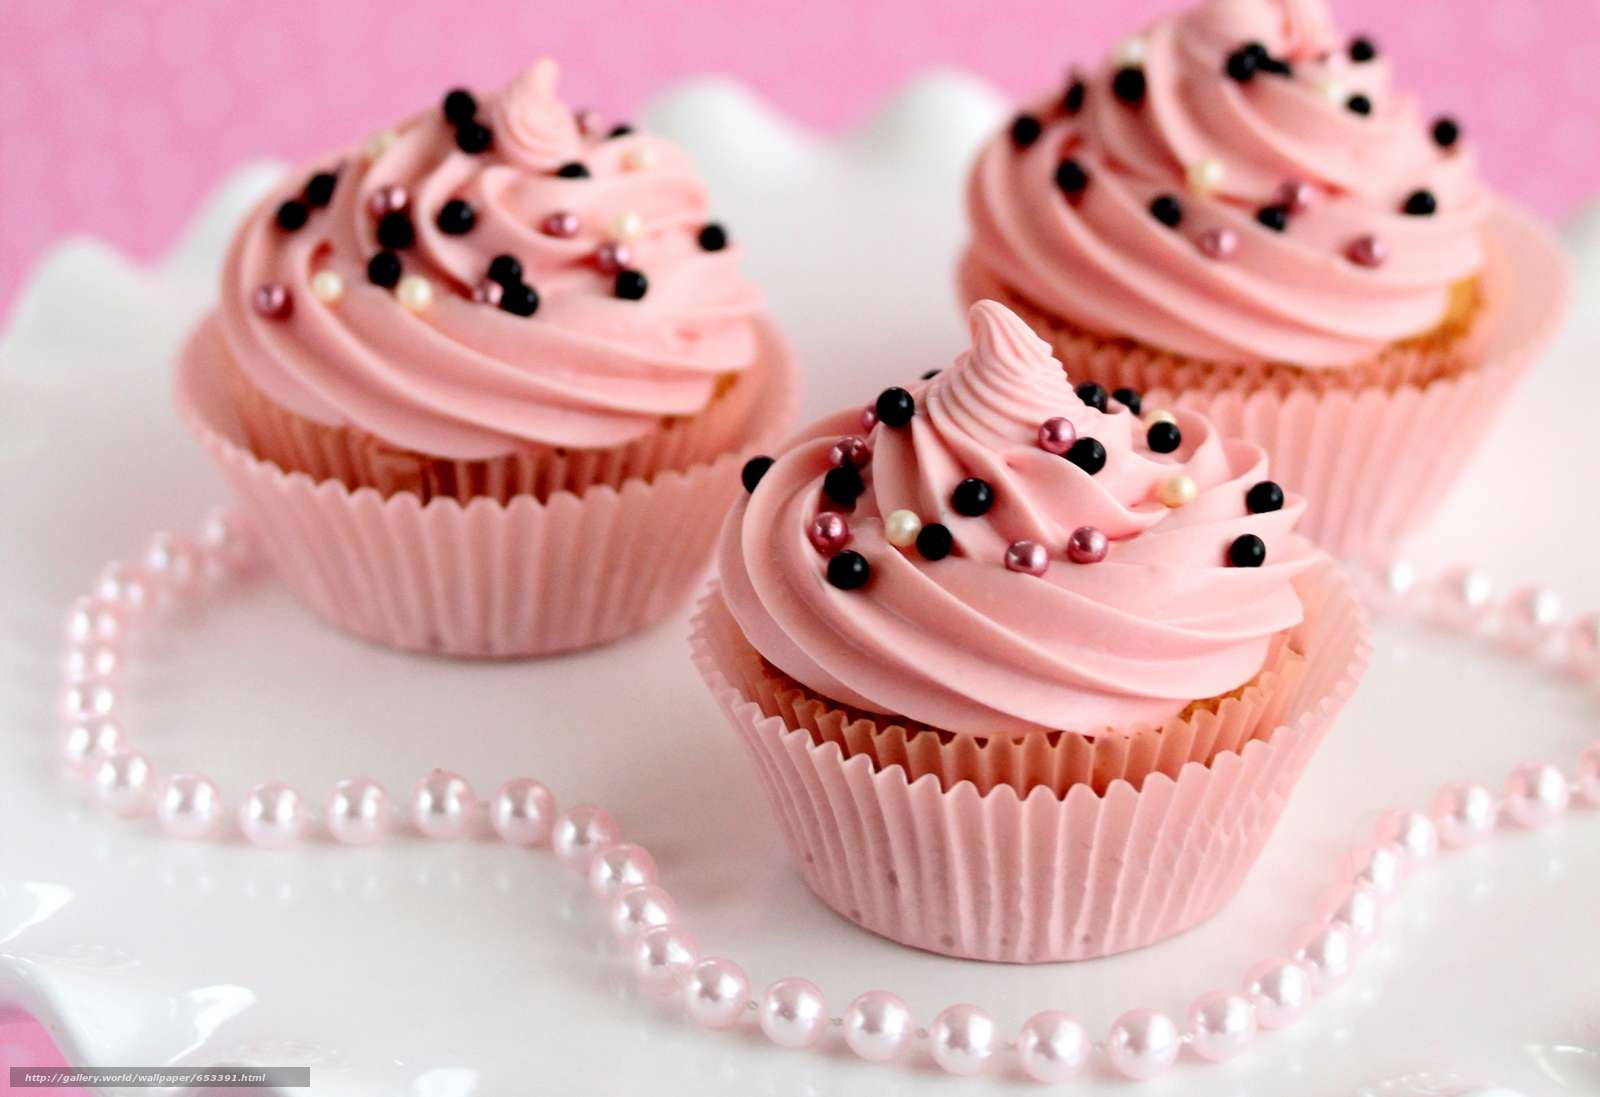 Bellissimi dolci - muffin puzzle online